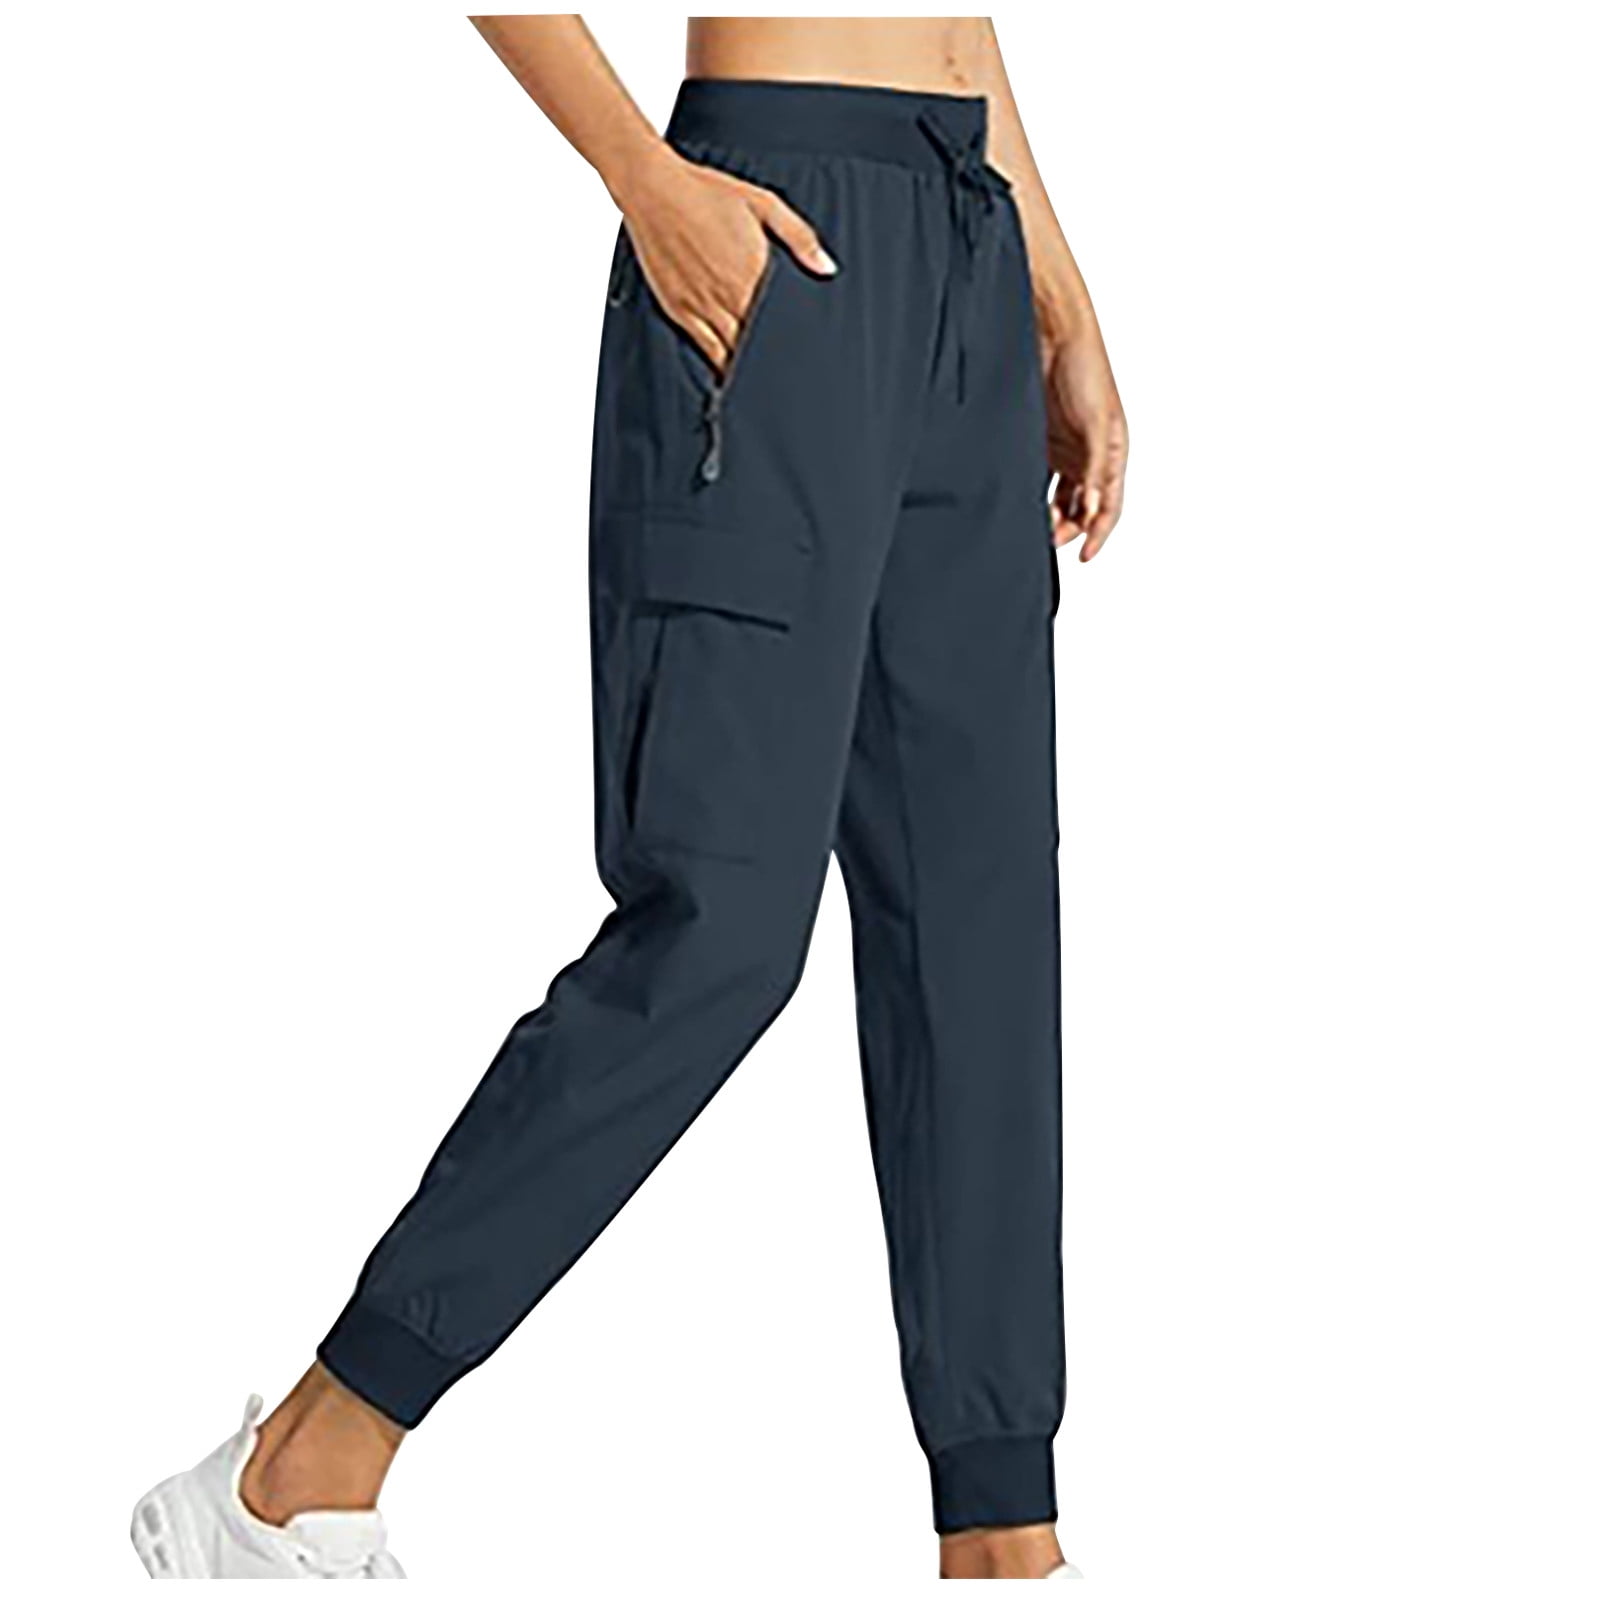 SMihono Women's Work Wear Jogging Pants, Nylon Quick Drying Hiking Pants,  Active Sports, Fitness, Leisure, Outdoor Small Foot Pants Female Fashion